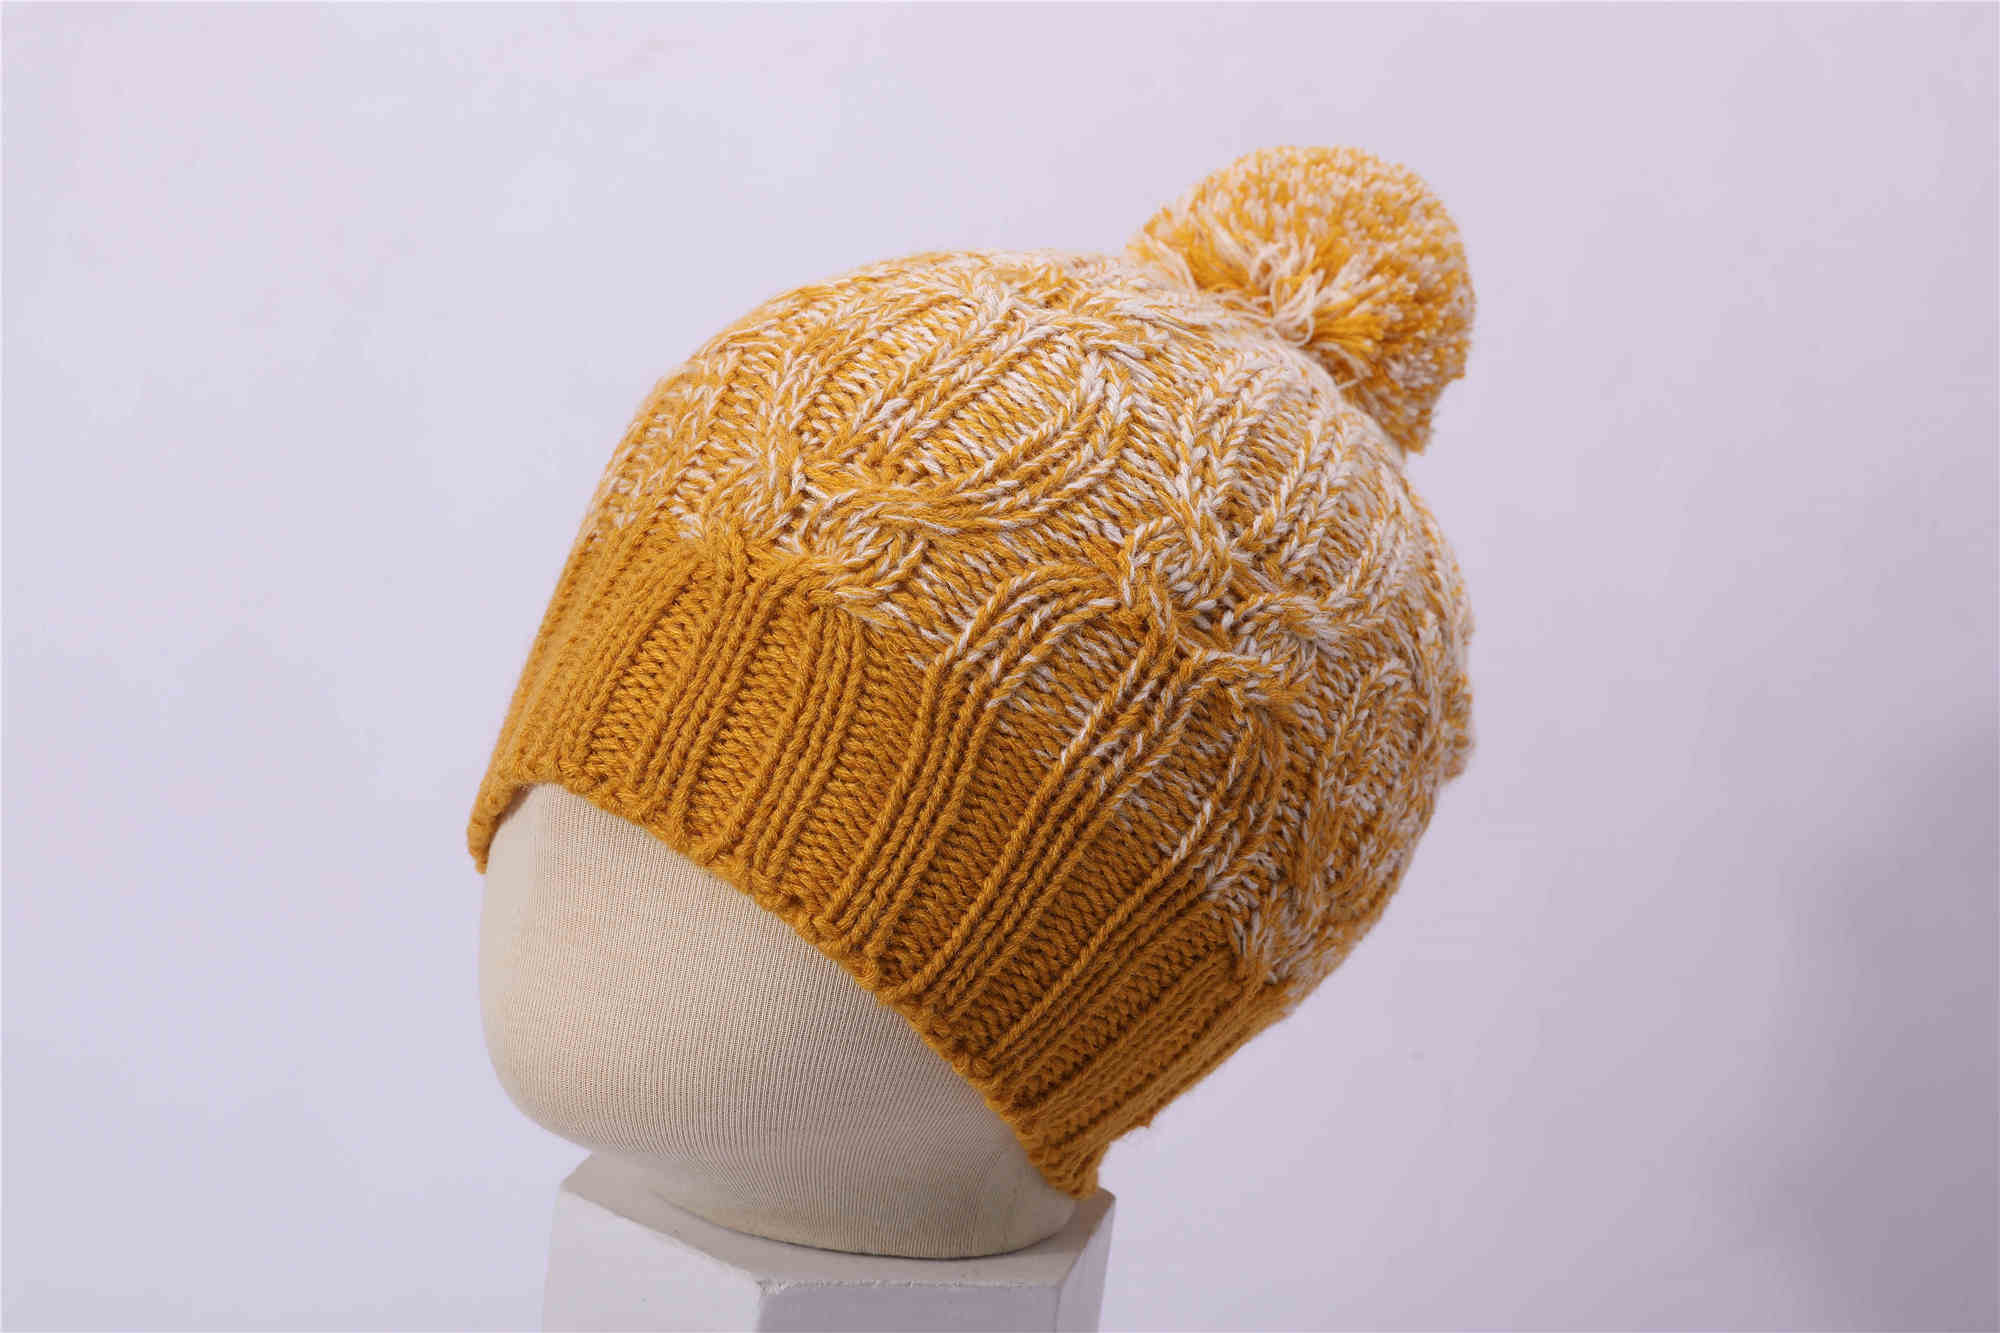 Custom ladies knitted cable beanie wholesale anti-pilling hats knitted beanie hat cap with pom poms